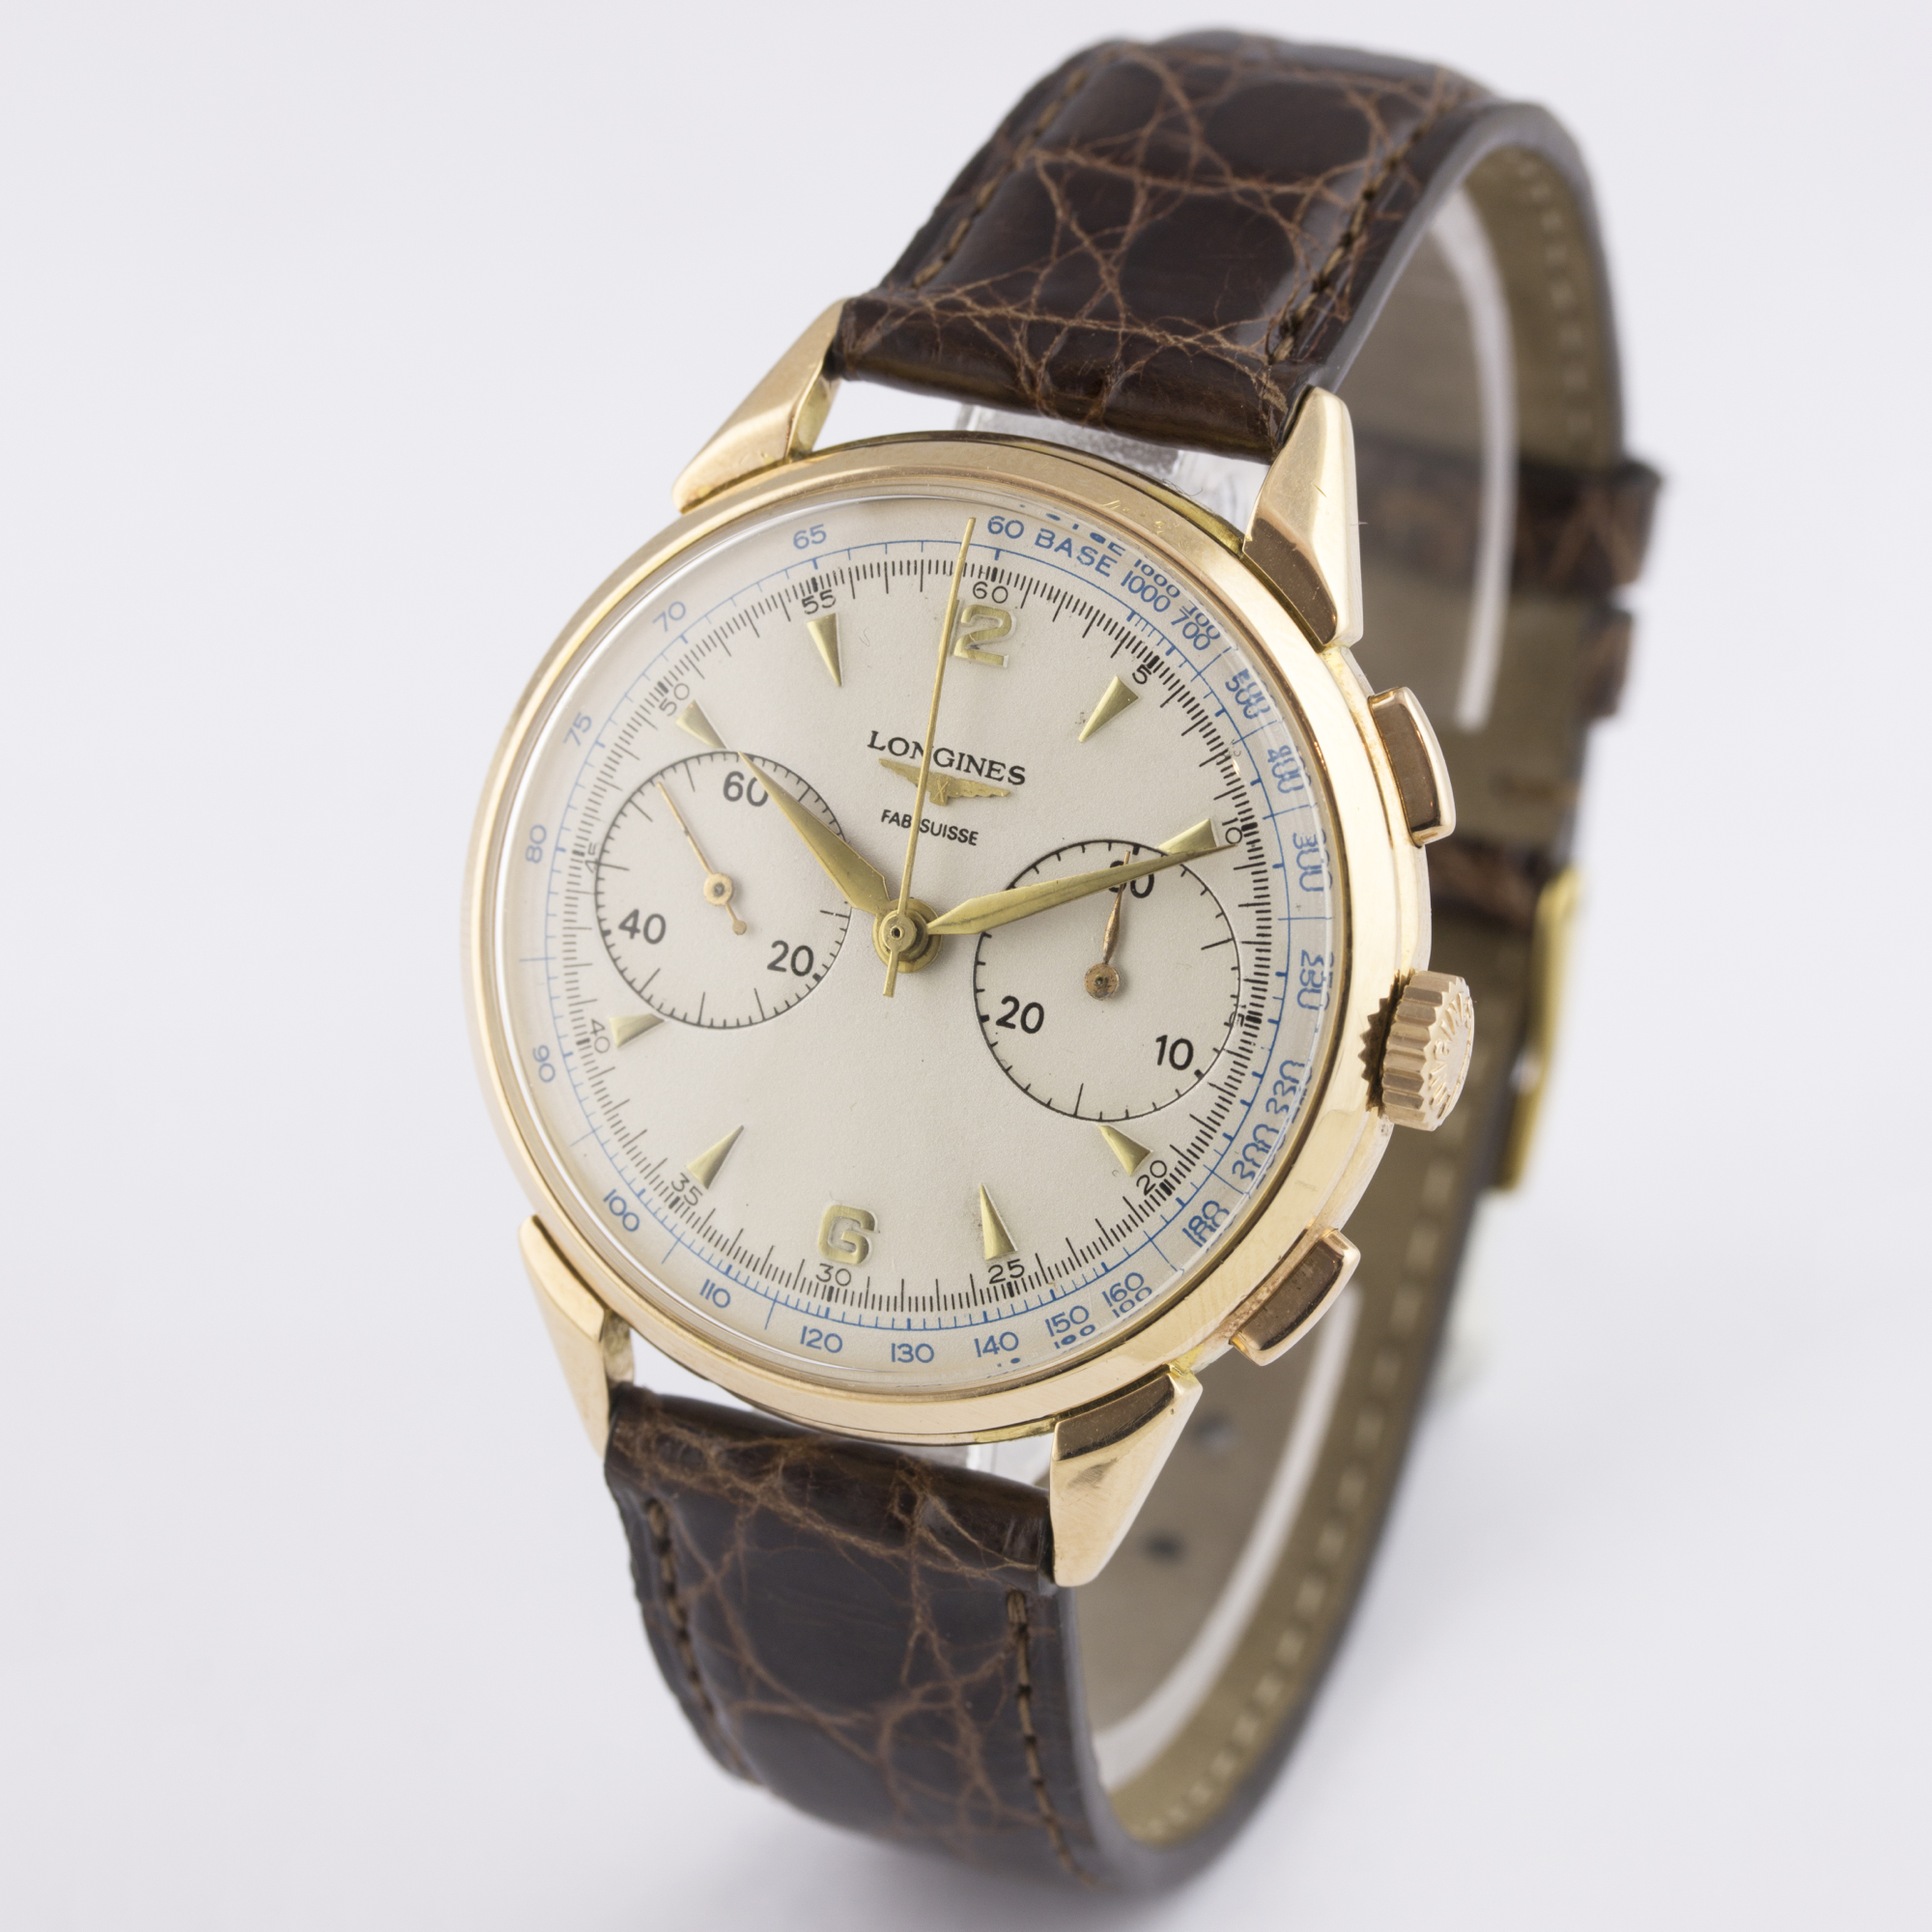 A GENTLEMAN'S 18K SOLID ROSE GOLD LONGINES FLYBACK CHRONOGRAPH WRIST WATCH CIRCA 1950, WITH A COPY - Image 4 of 8